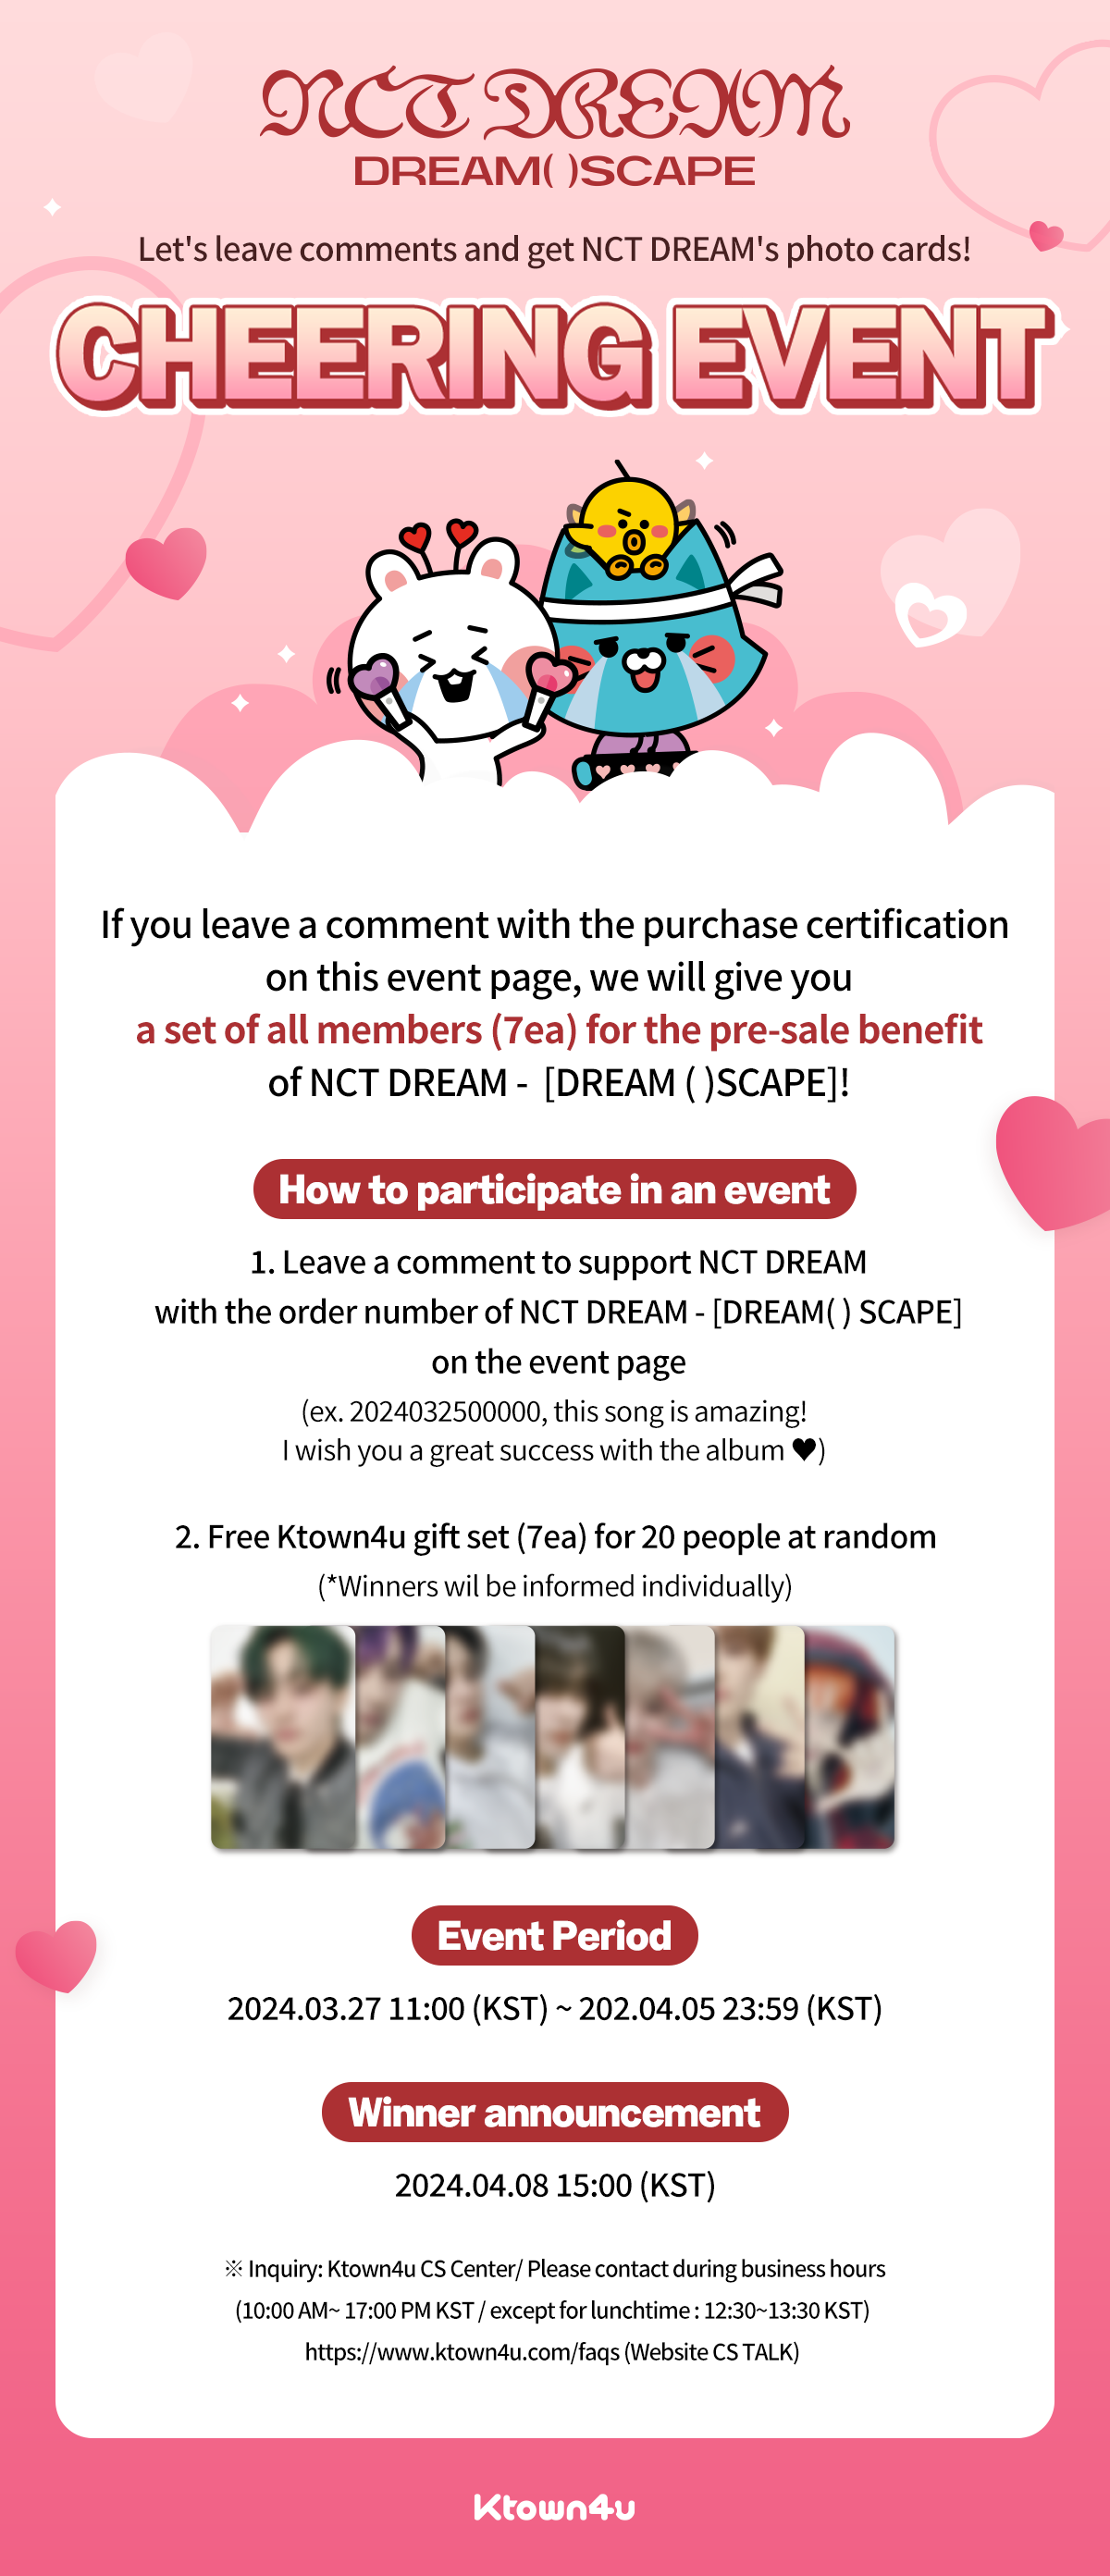 Let's leave comments and get NCT DREAM's photo cards!